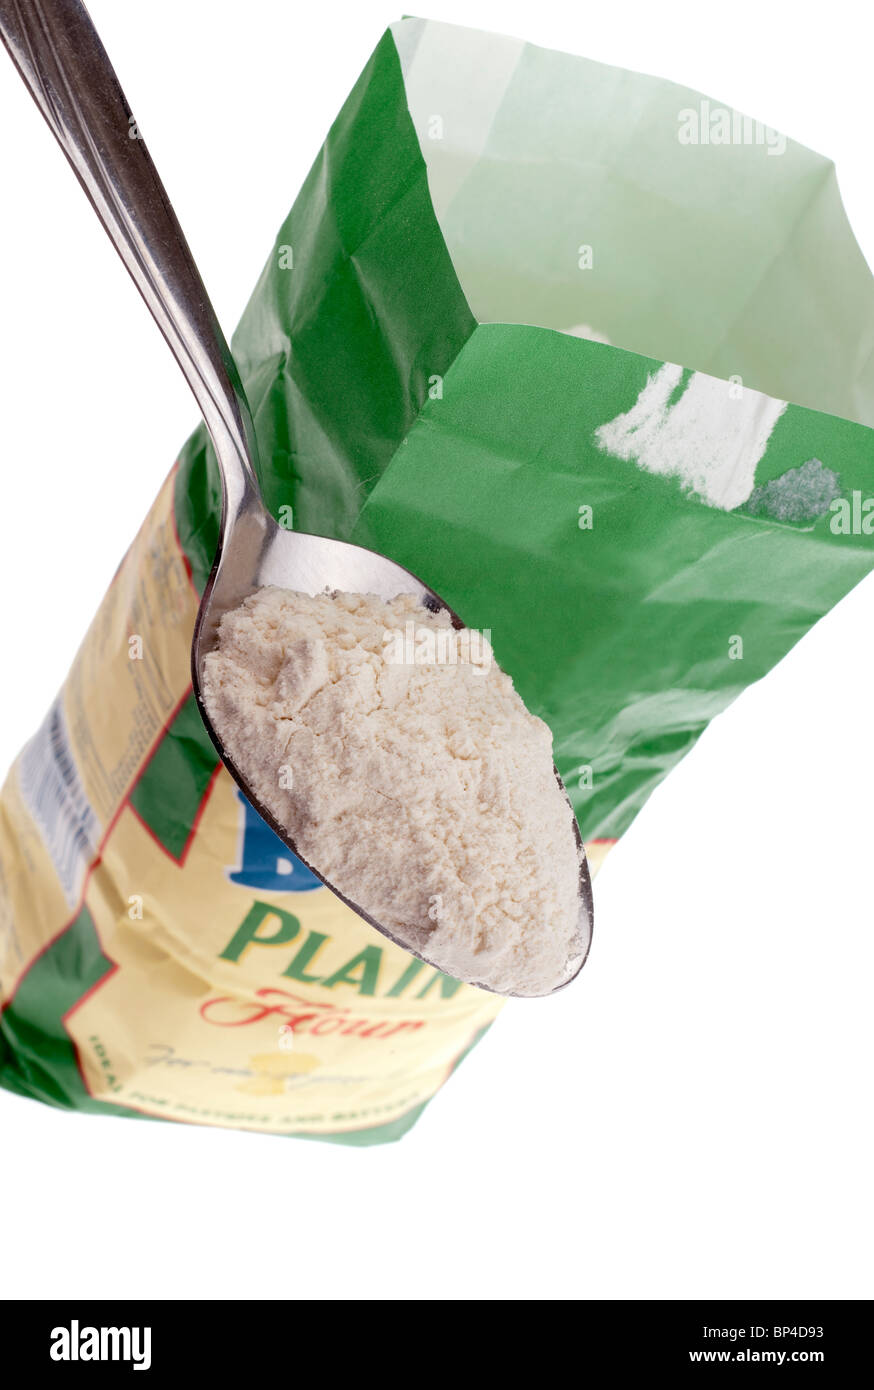 Tablespoonful of plain flour being lifted from a paper bag Stock Photo